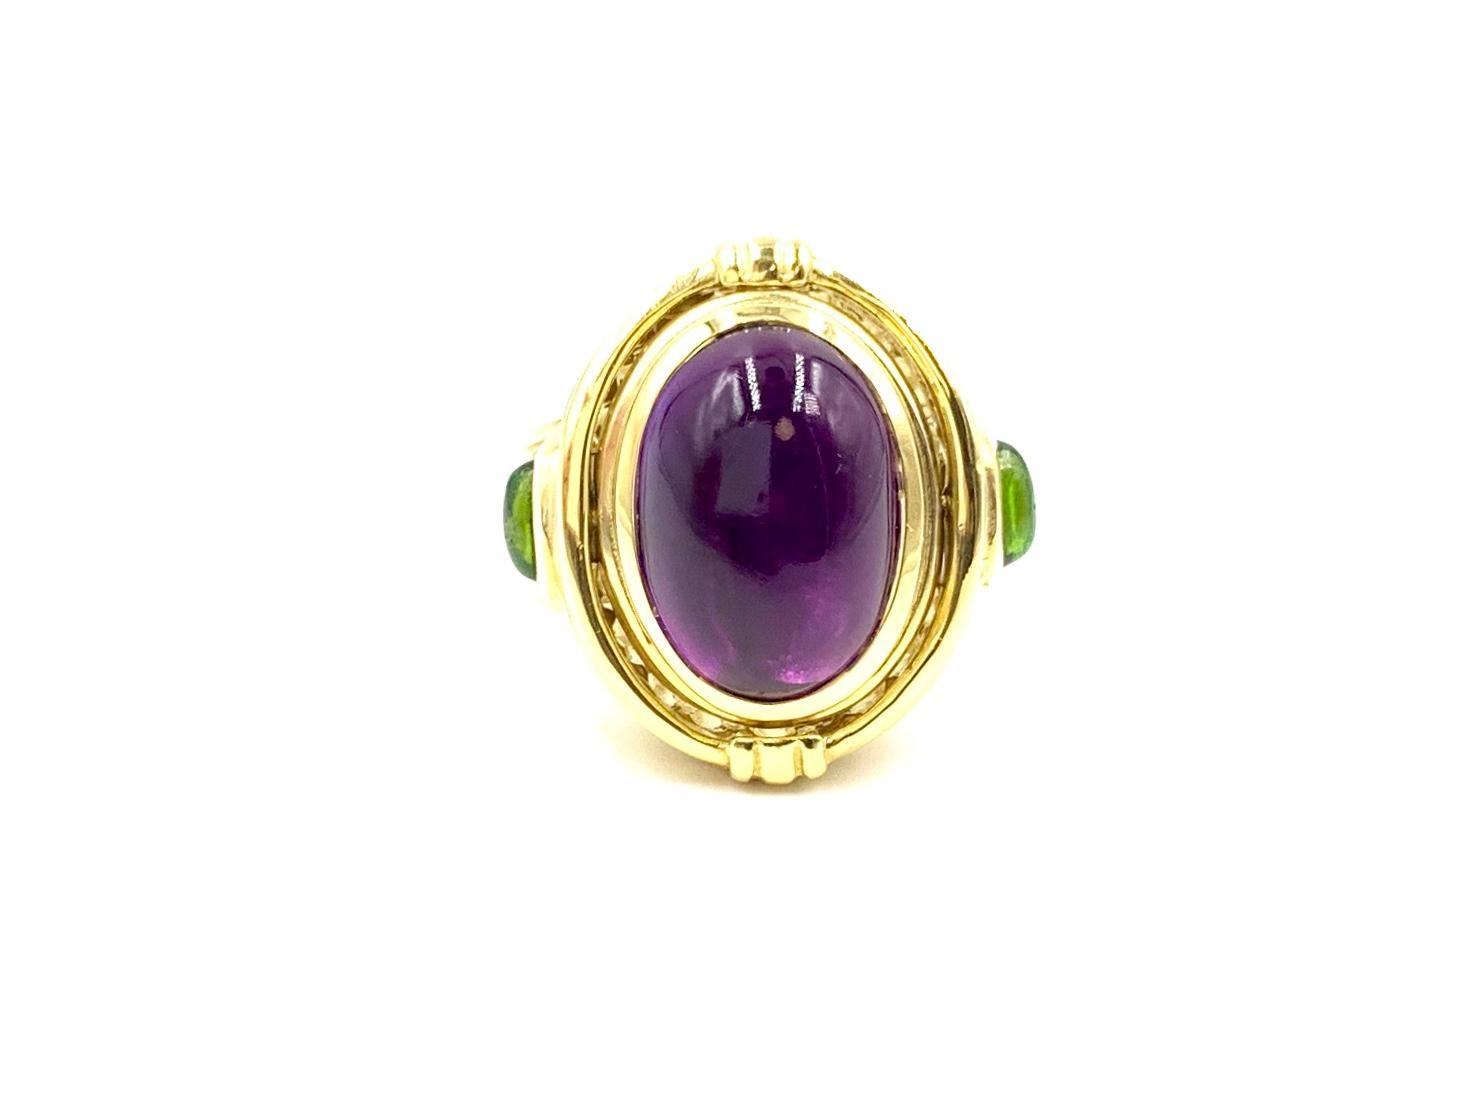 Two stylish looks in one solid 18 karat yellow gold SeidenGang ring. A well saturated bezel set cabochon amethyst can be flipped to show a carved gold Greek inspired relief. An oval cabochon green tourmaline is set on each side of the ring. Gold has